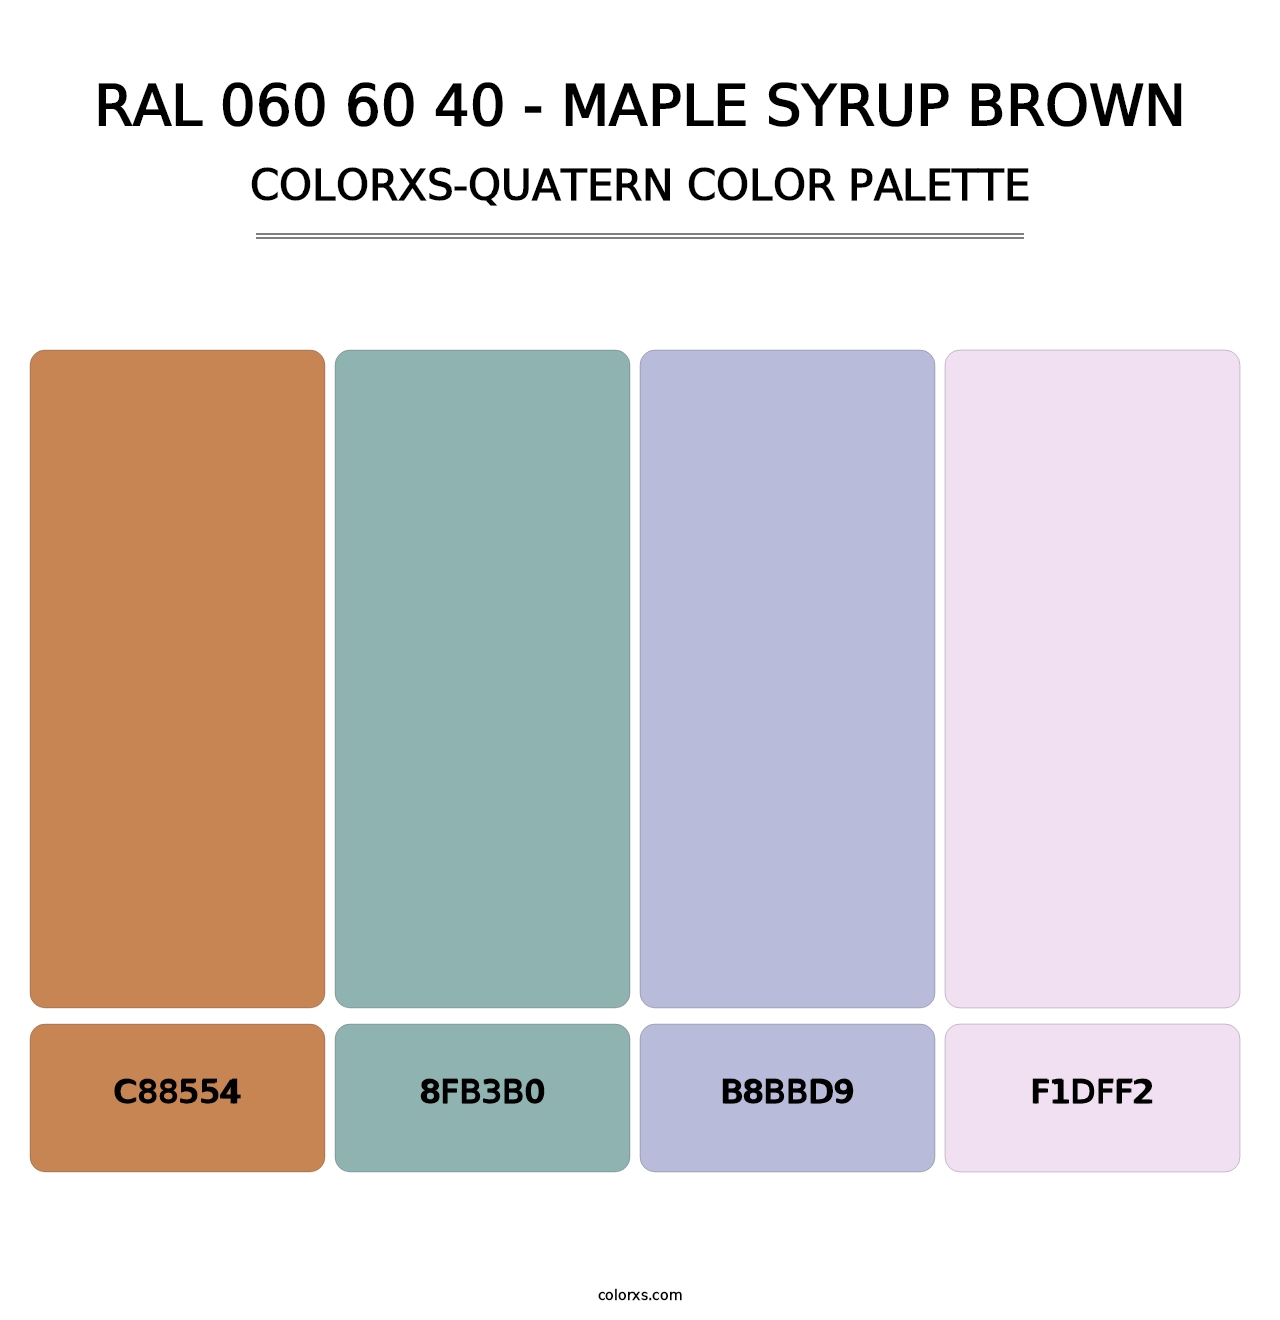 RAL 060 60 40 - Maple Syrup Brown - Colorxs Quatern Palette